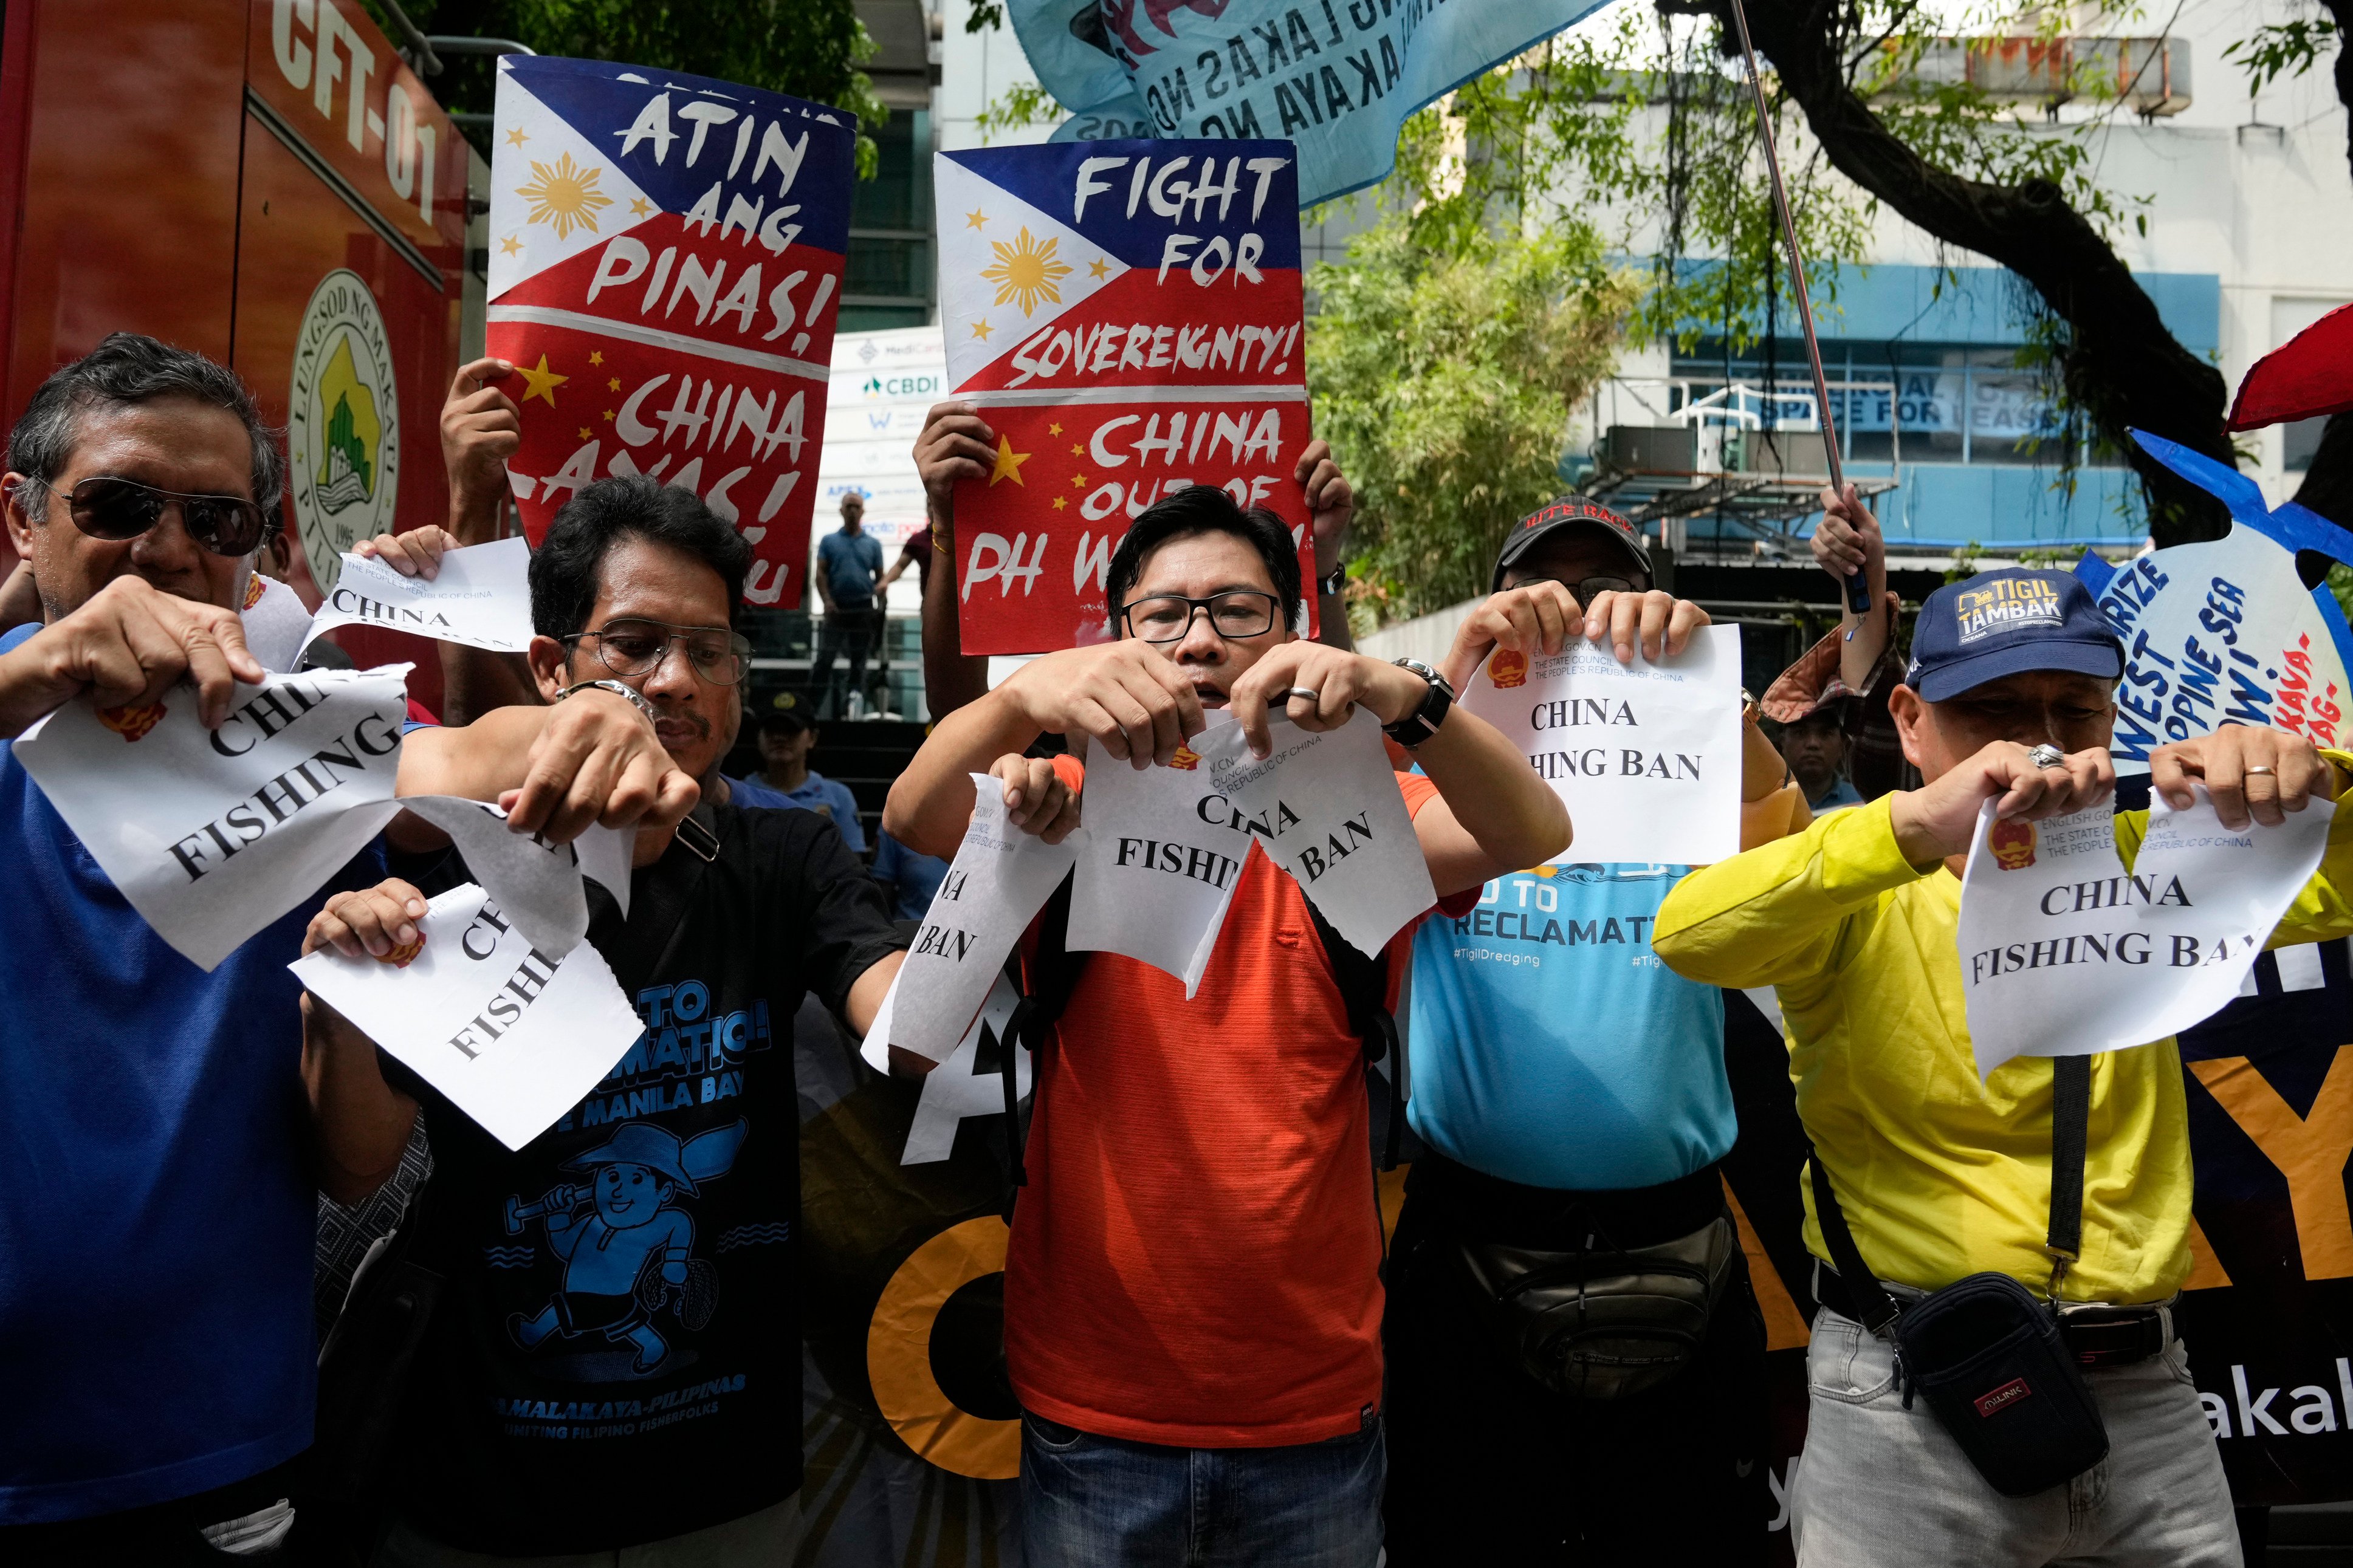 Activists stage an anti-China protest near the Chinese consulate in Makati, Philippines, earlier this month over the South China Sea dispute. Photo: AP